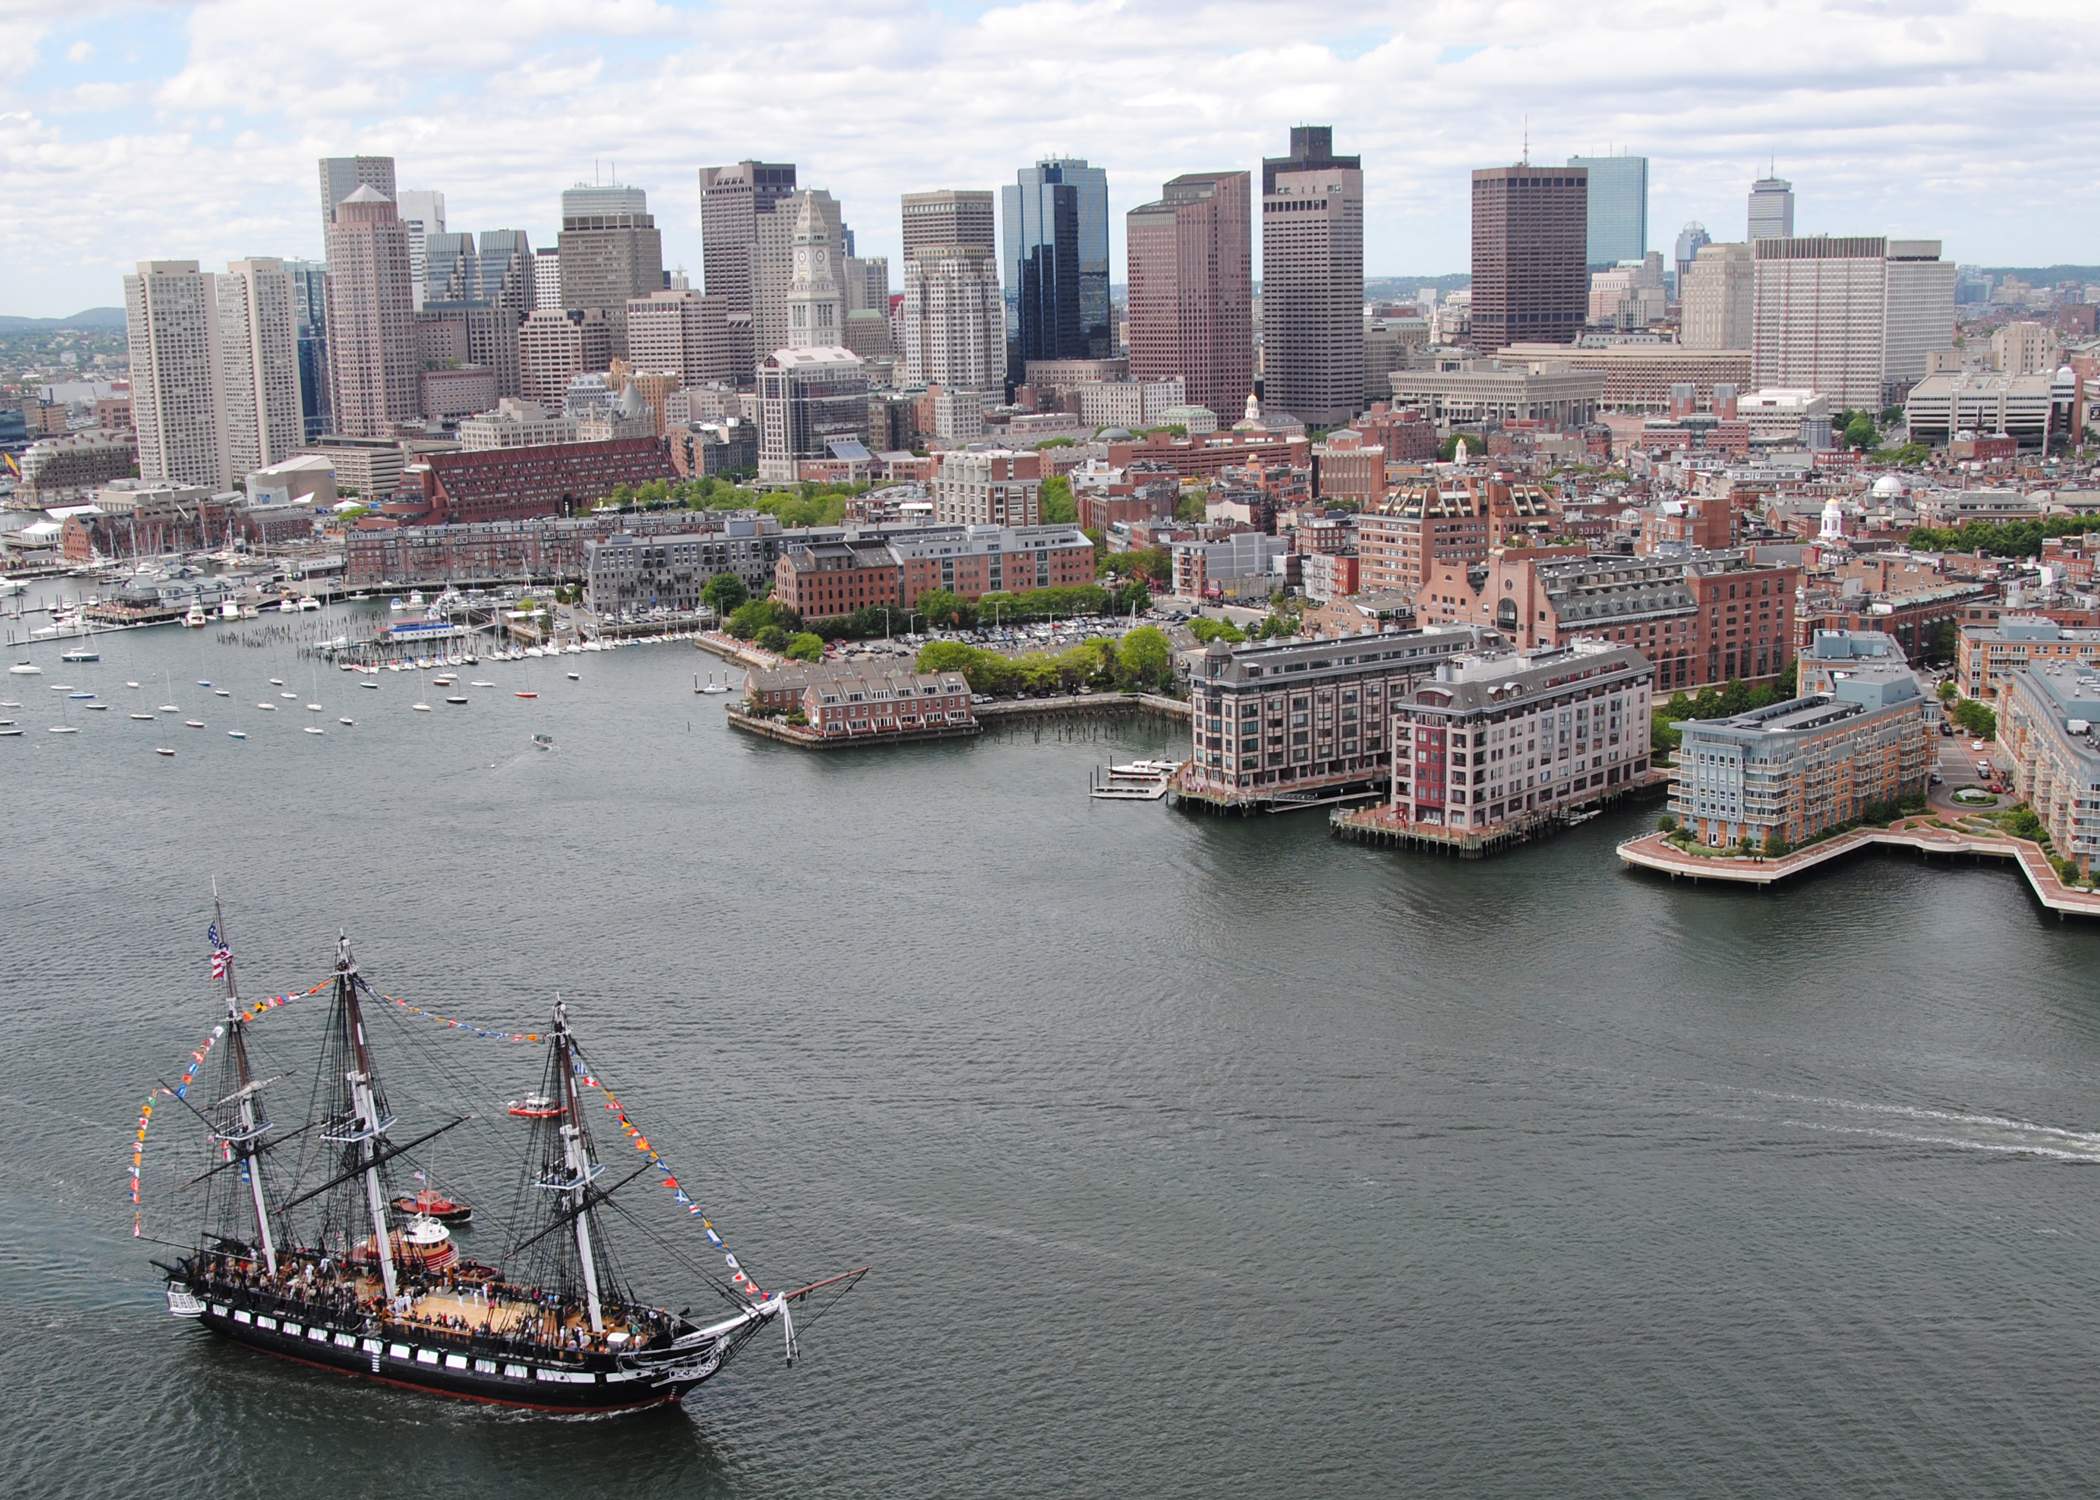 Boston releases 50-year floodproofing plan to meet climate risks